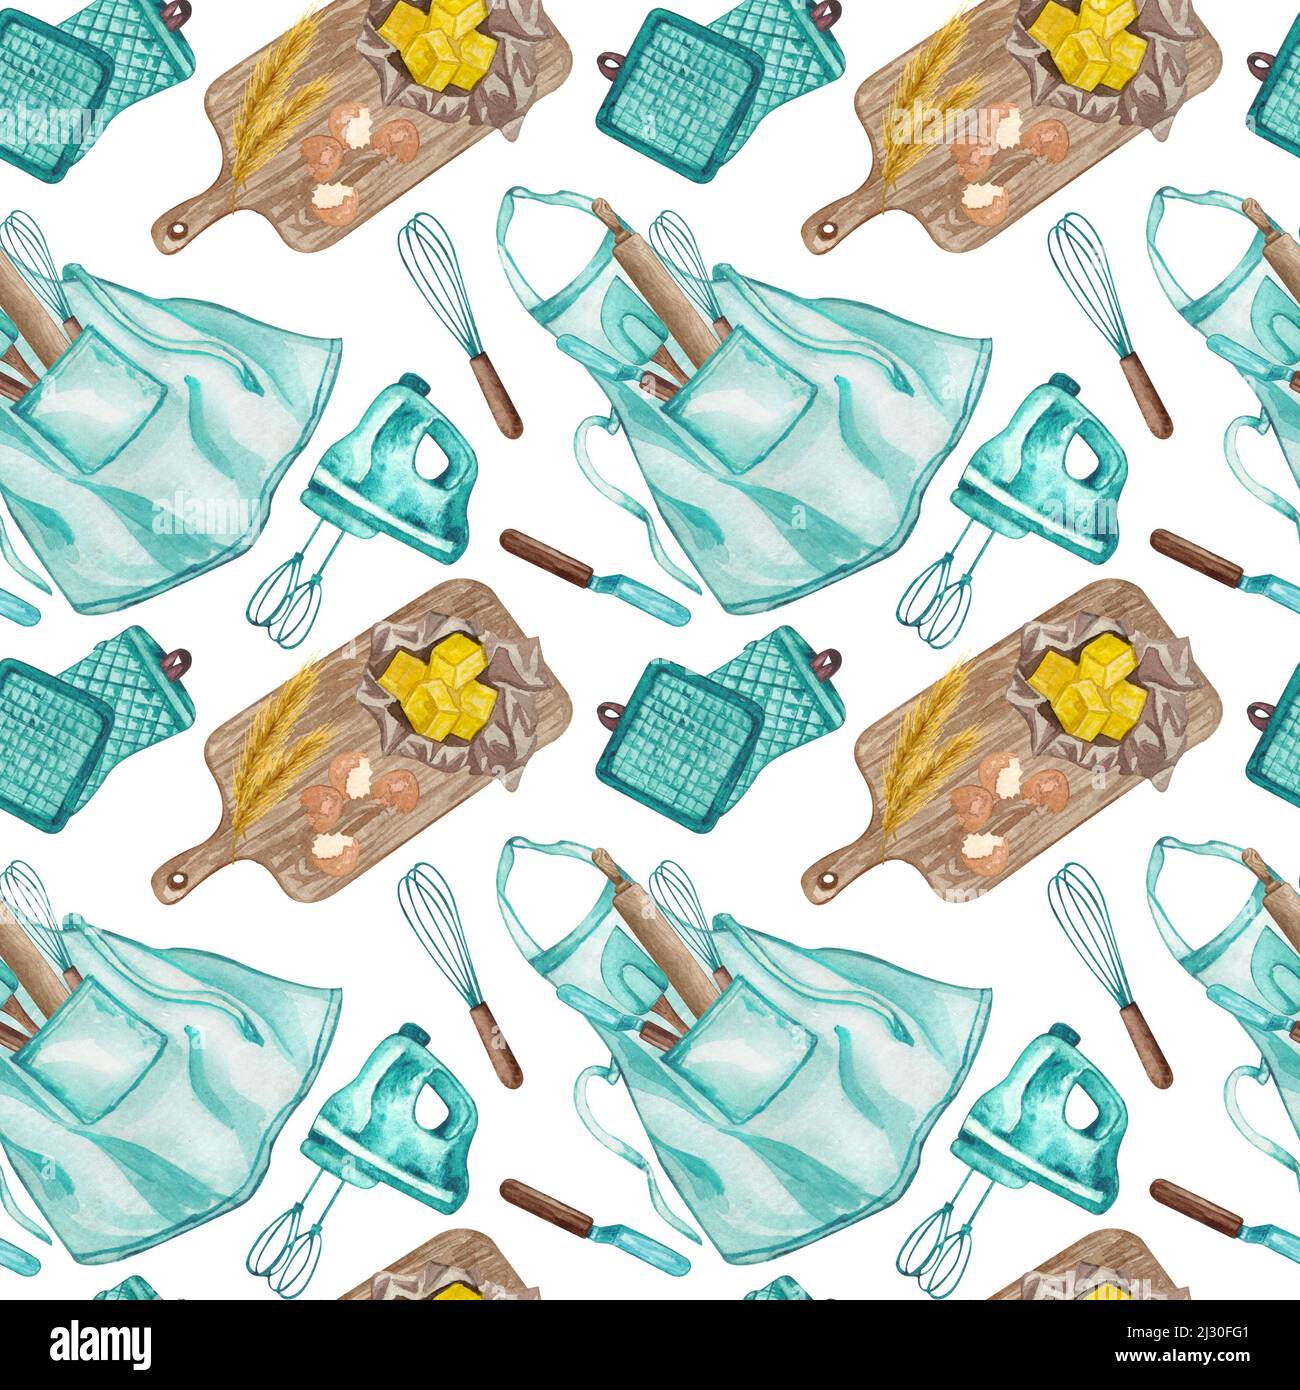 baking watercolor seamless pattern with kitchen utensils on white background. Hand drawn illustration Stock Photo